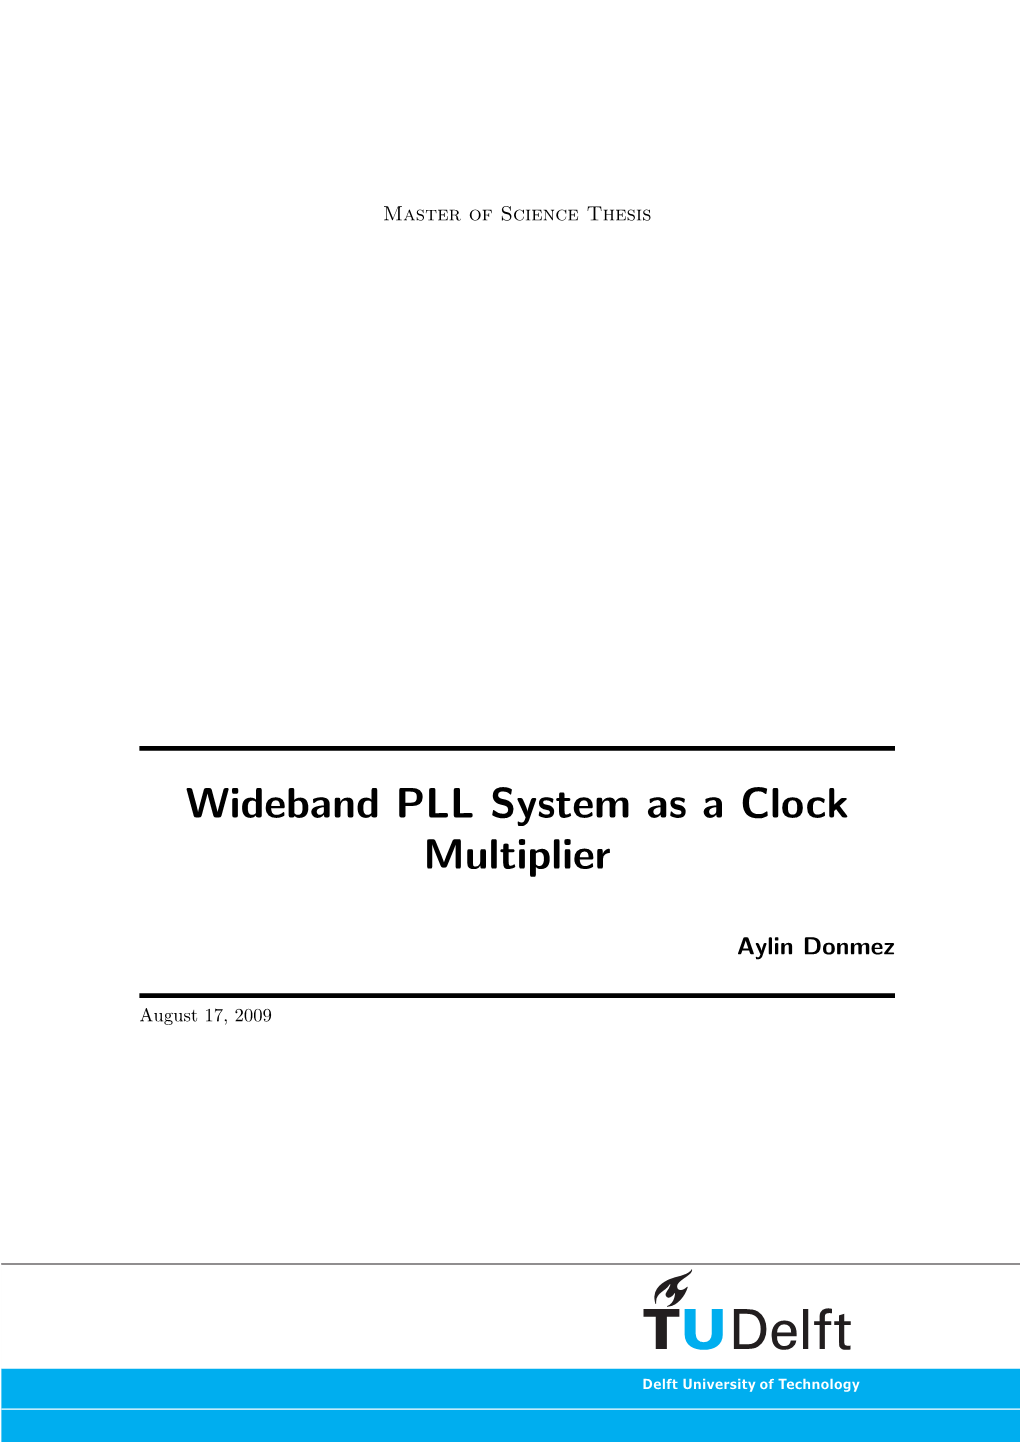 Masters Thesis: Wideband PLL System As a Clock Multiplier